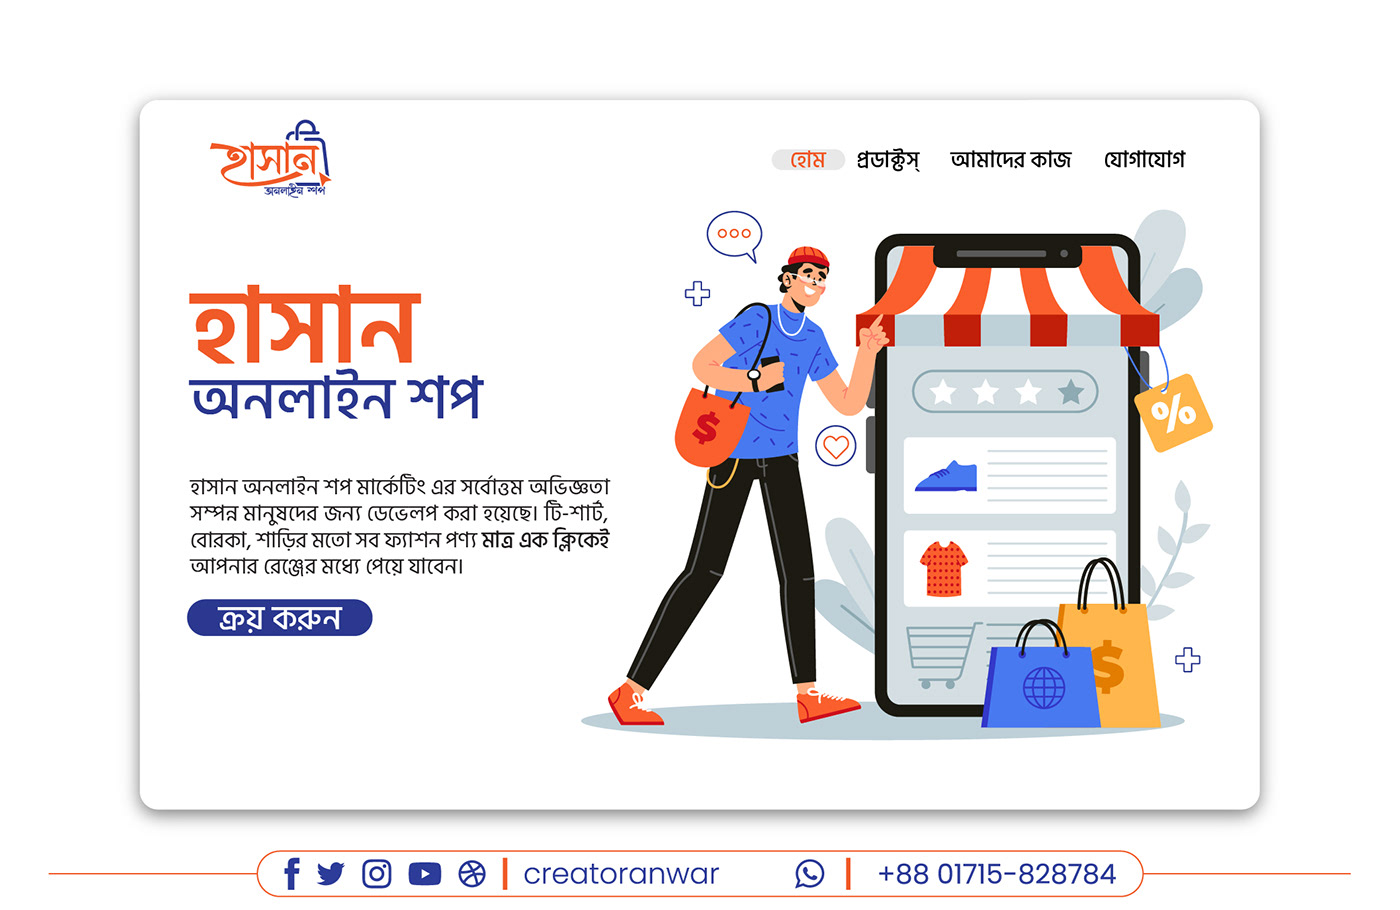 Hasan Online Shop is a Facebook E-commarce based Online Shop. It also upgraded itself for people wit